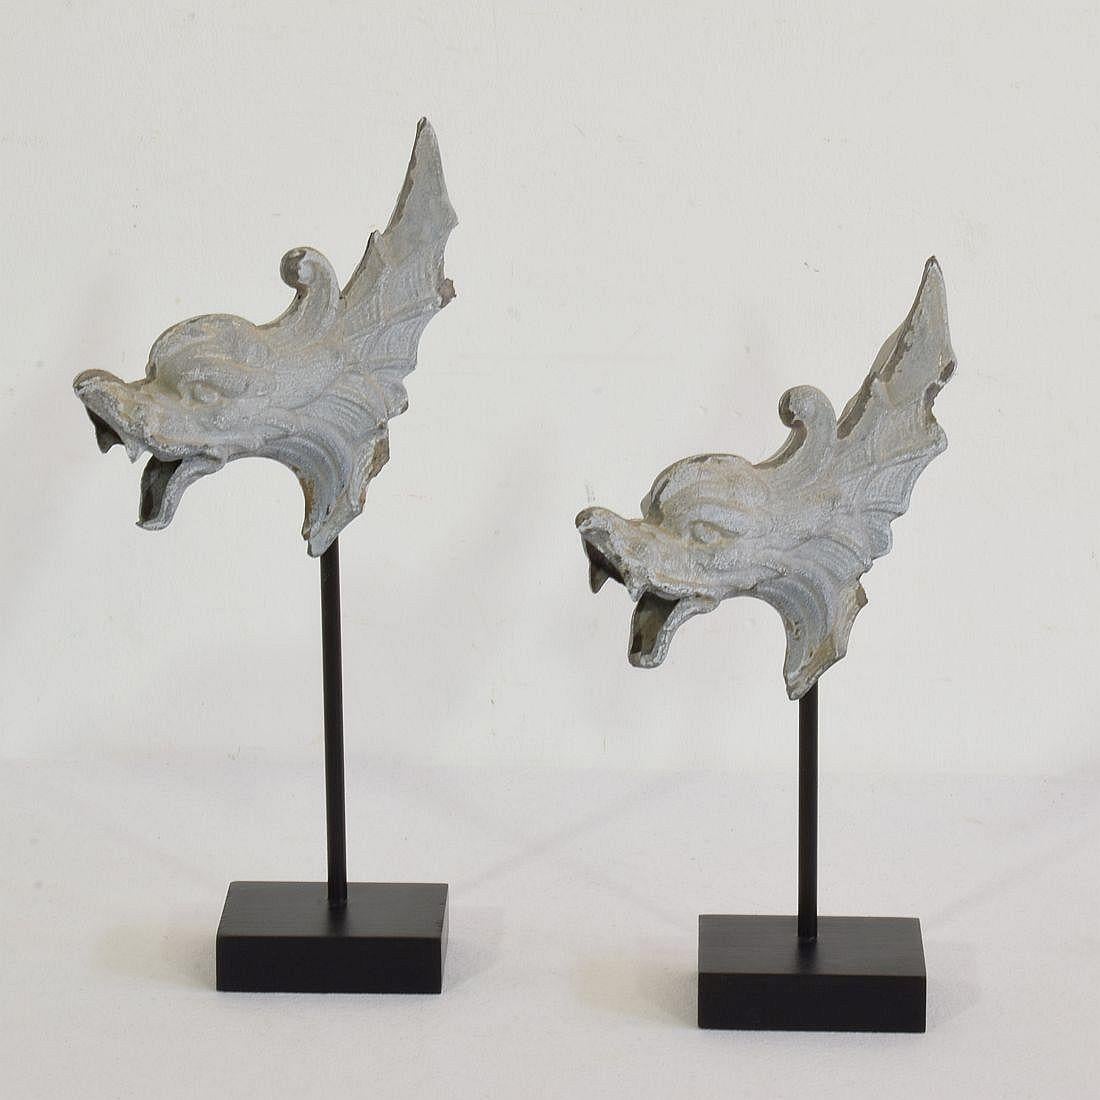 Rare pair of zinc fragments representing mythical figures/ gargoyles. They once graced a rich facade of a building,
Original period pieces, France, circa 1850-1900.
Weathered. Measures: H: 22-26cm W: 13cm D: 11cm 
Measurement includes the wooden